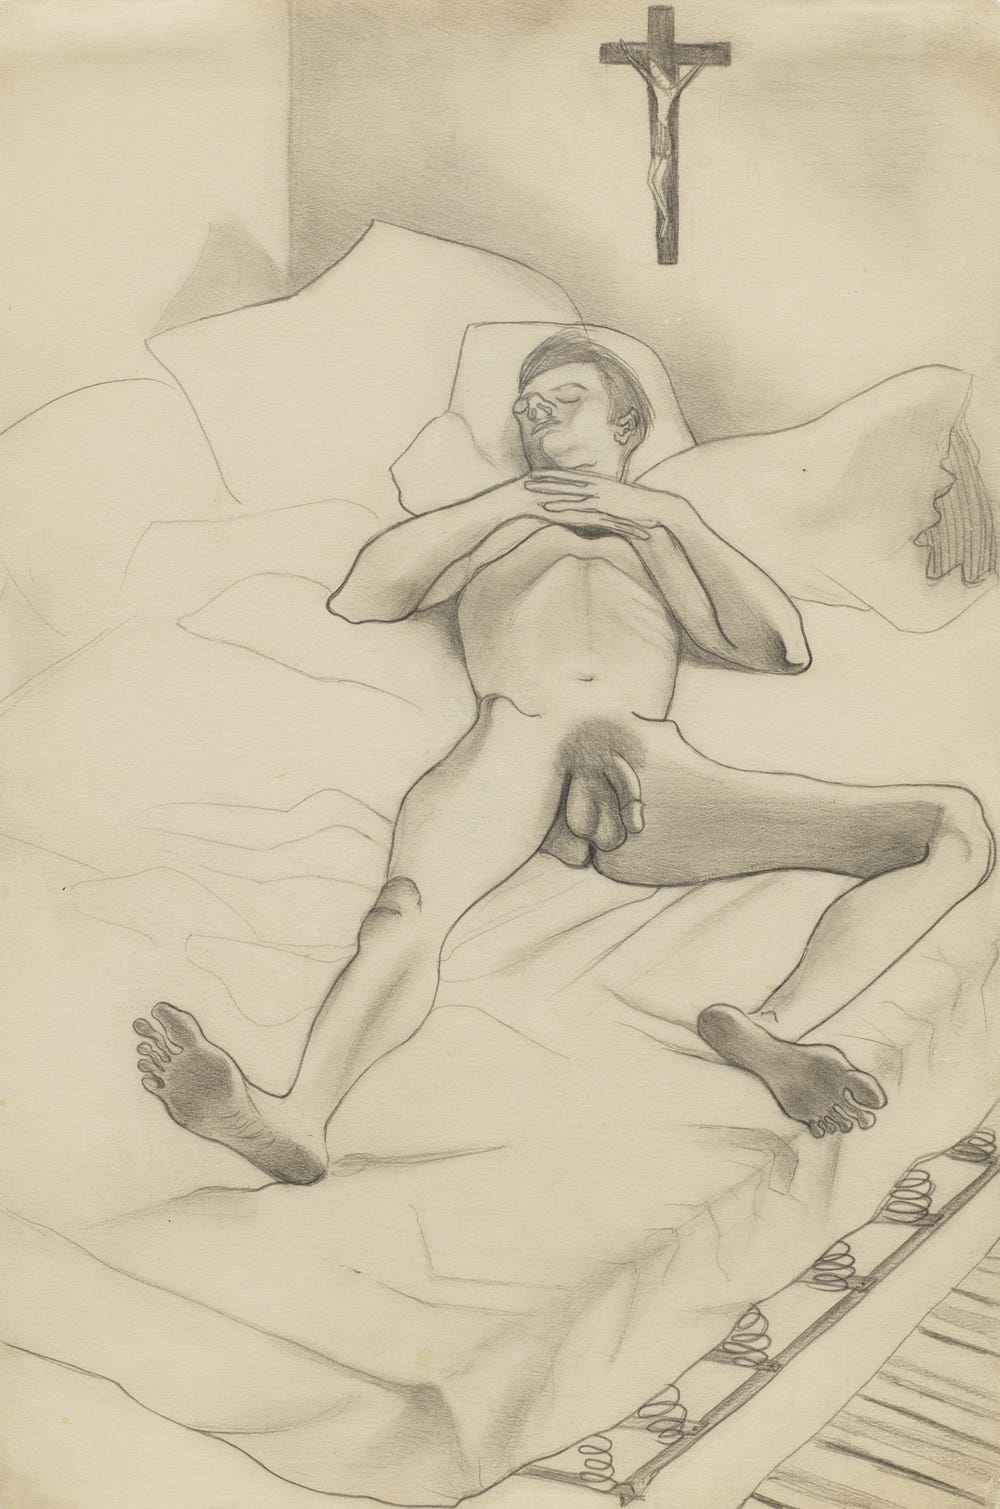 sketch by Alice Neel of nude man lying on a bed